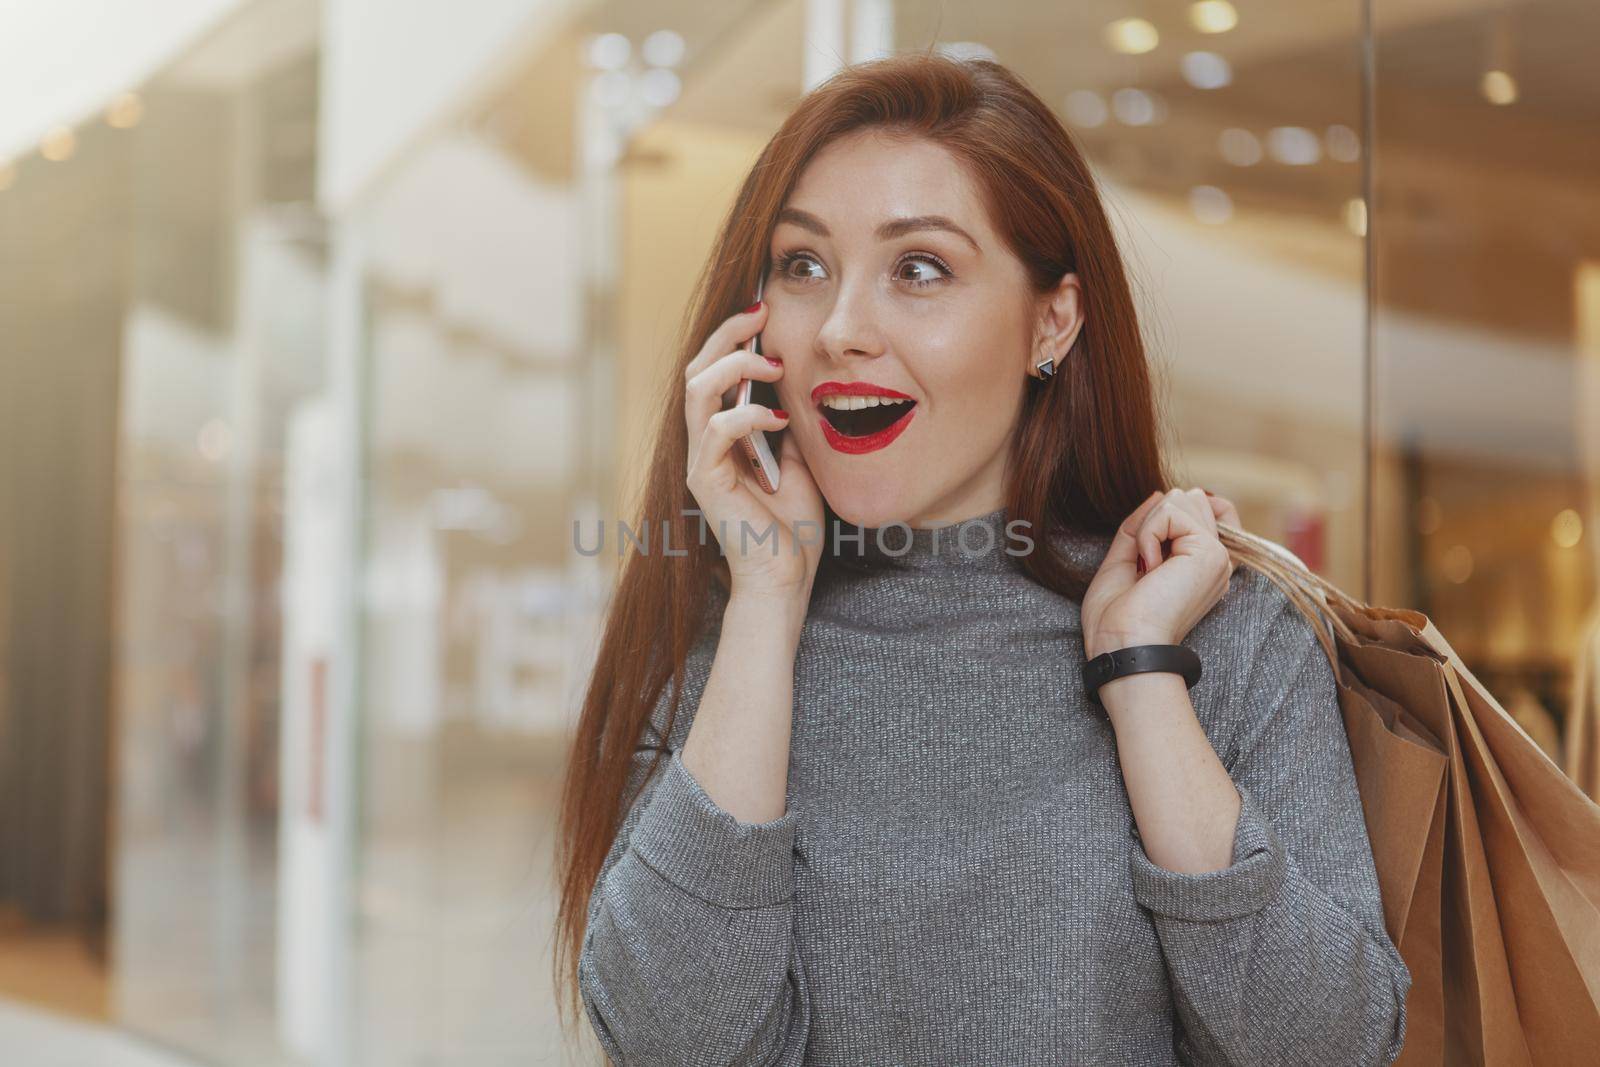 Beautiful young woman looking shocked, talking on her smart phone at the shopping mall, copy space. Gorgeous expressive female customer looking surprised, receiving news call on her mobile